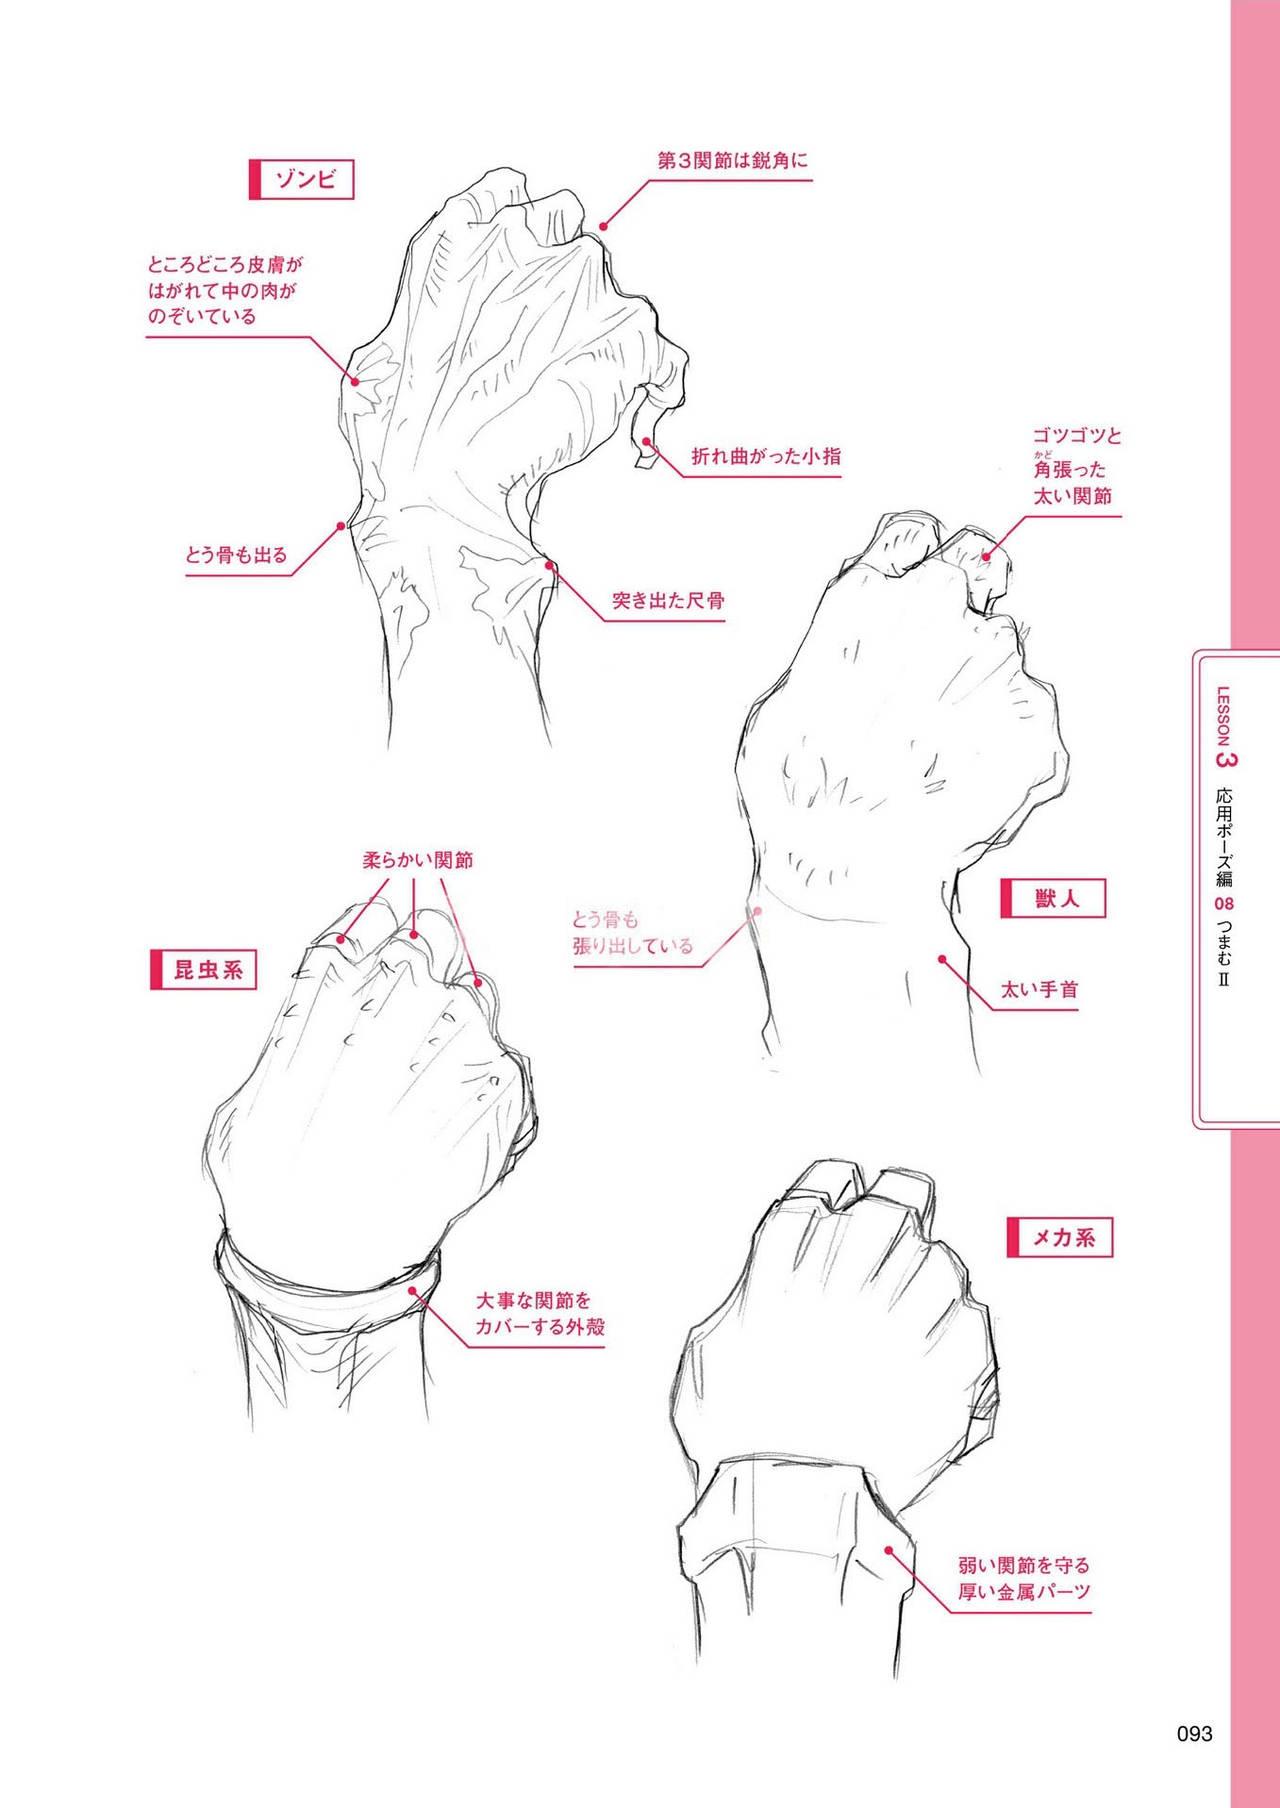 How to draw hands 93